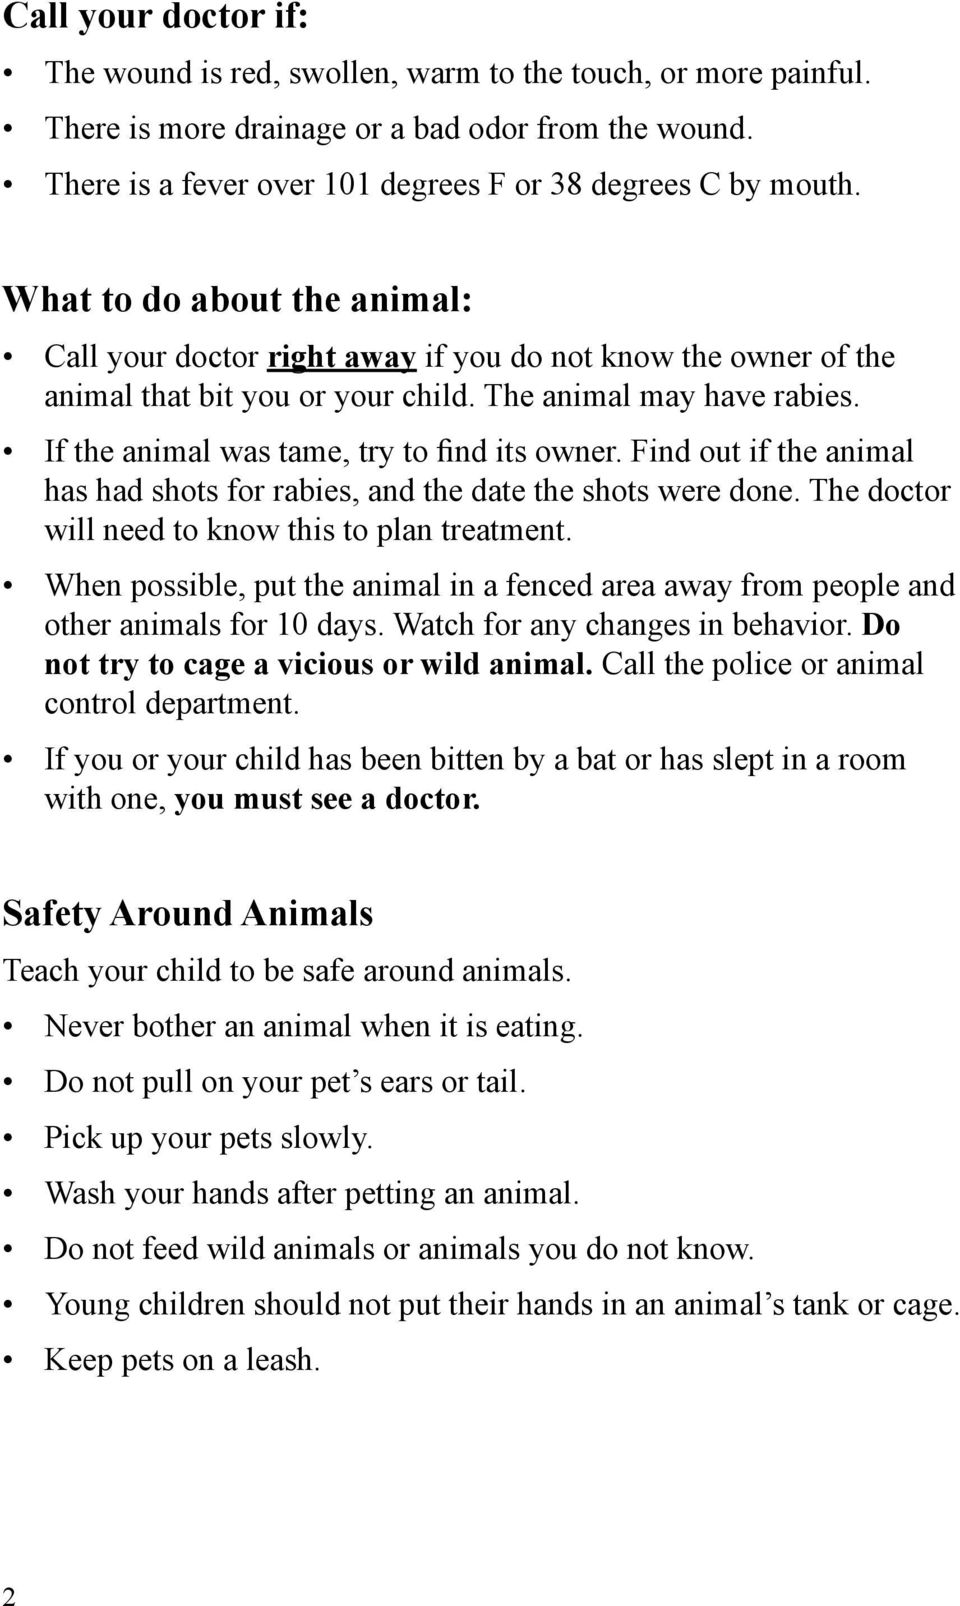 If the animal was tame, try to find its owner. Find out if the animal has had shots for rabies, and the date the shots were done. The doctor will need to know this to plan treatment.